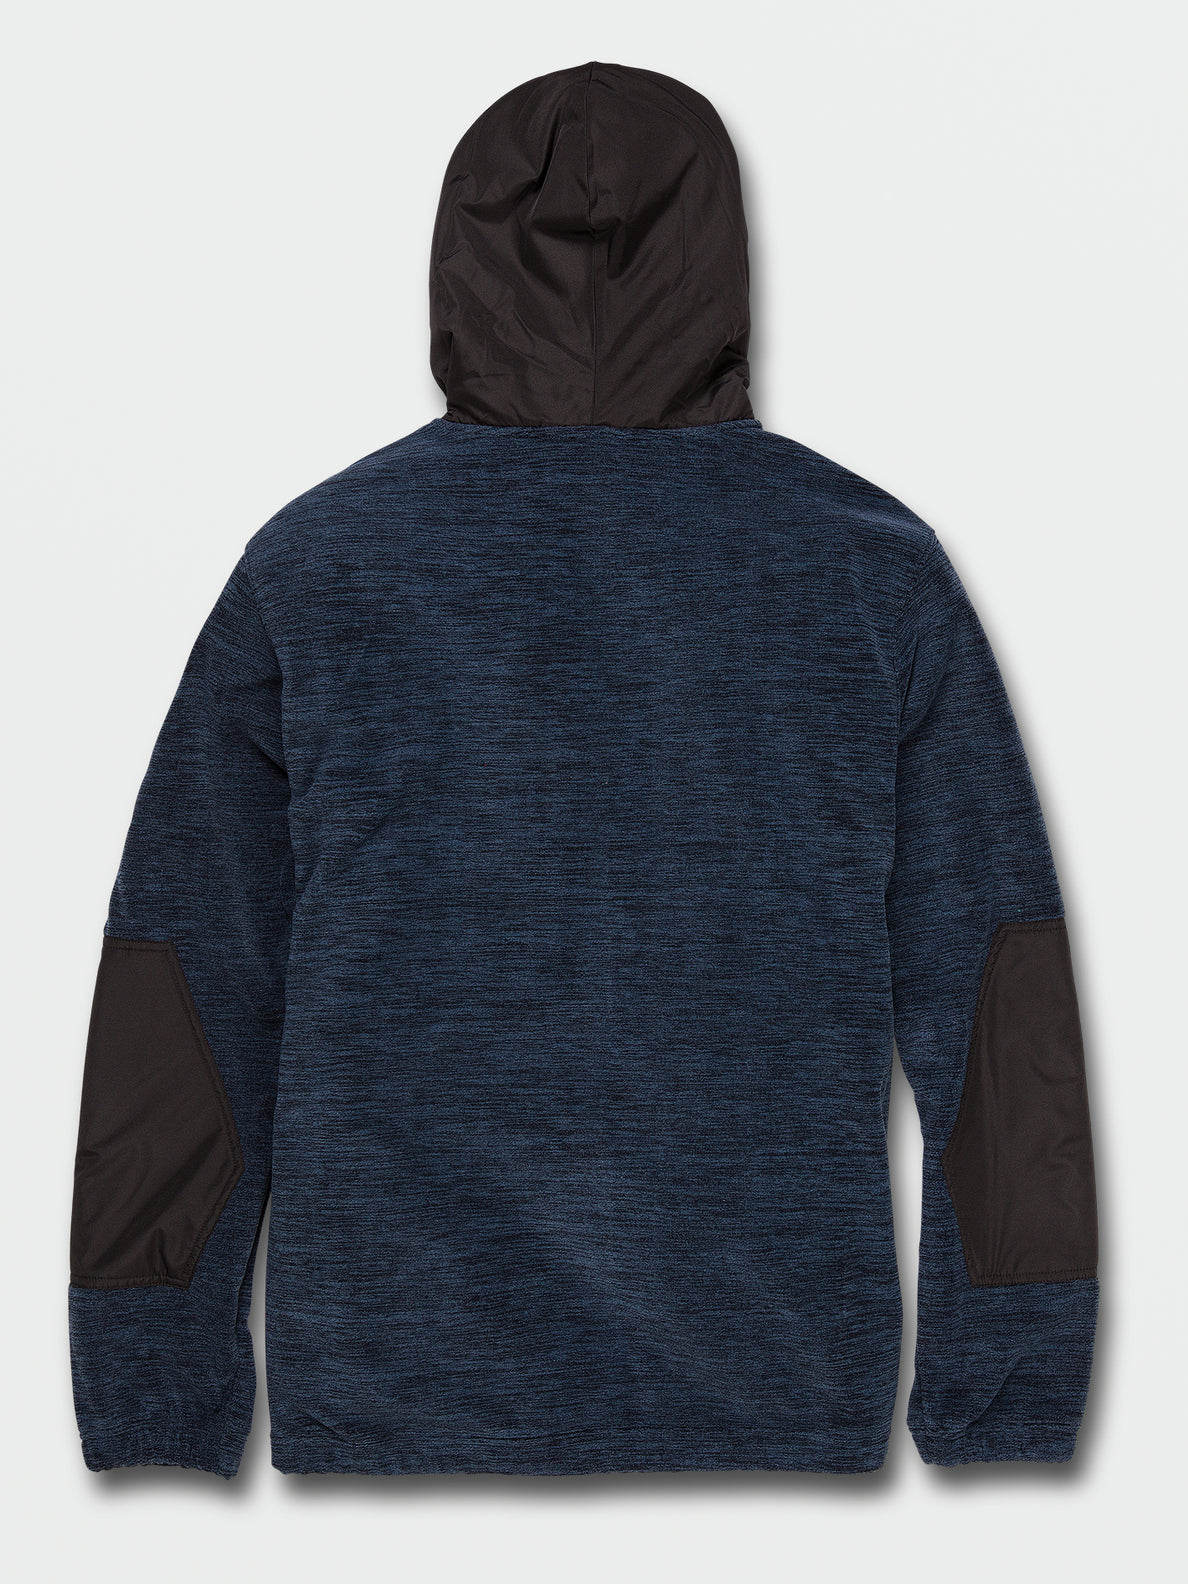 Yzzolater Lined Zip Hoodie - Navy (A5832100_NVY) [B]